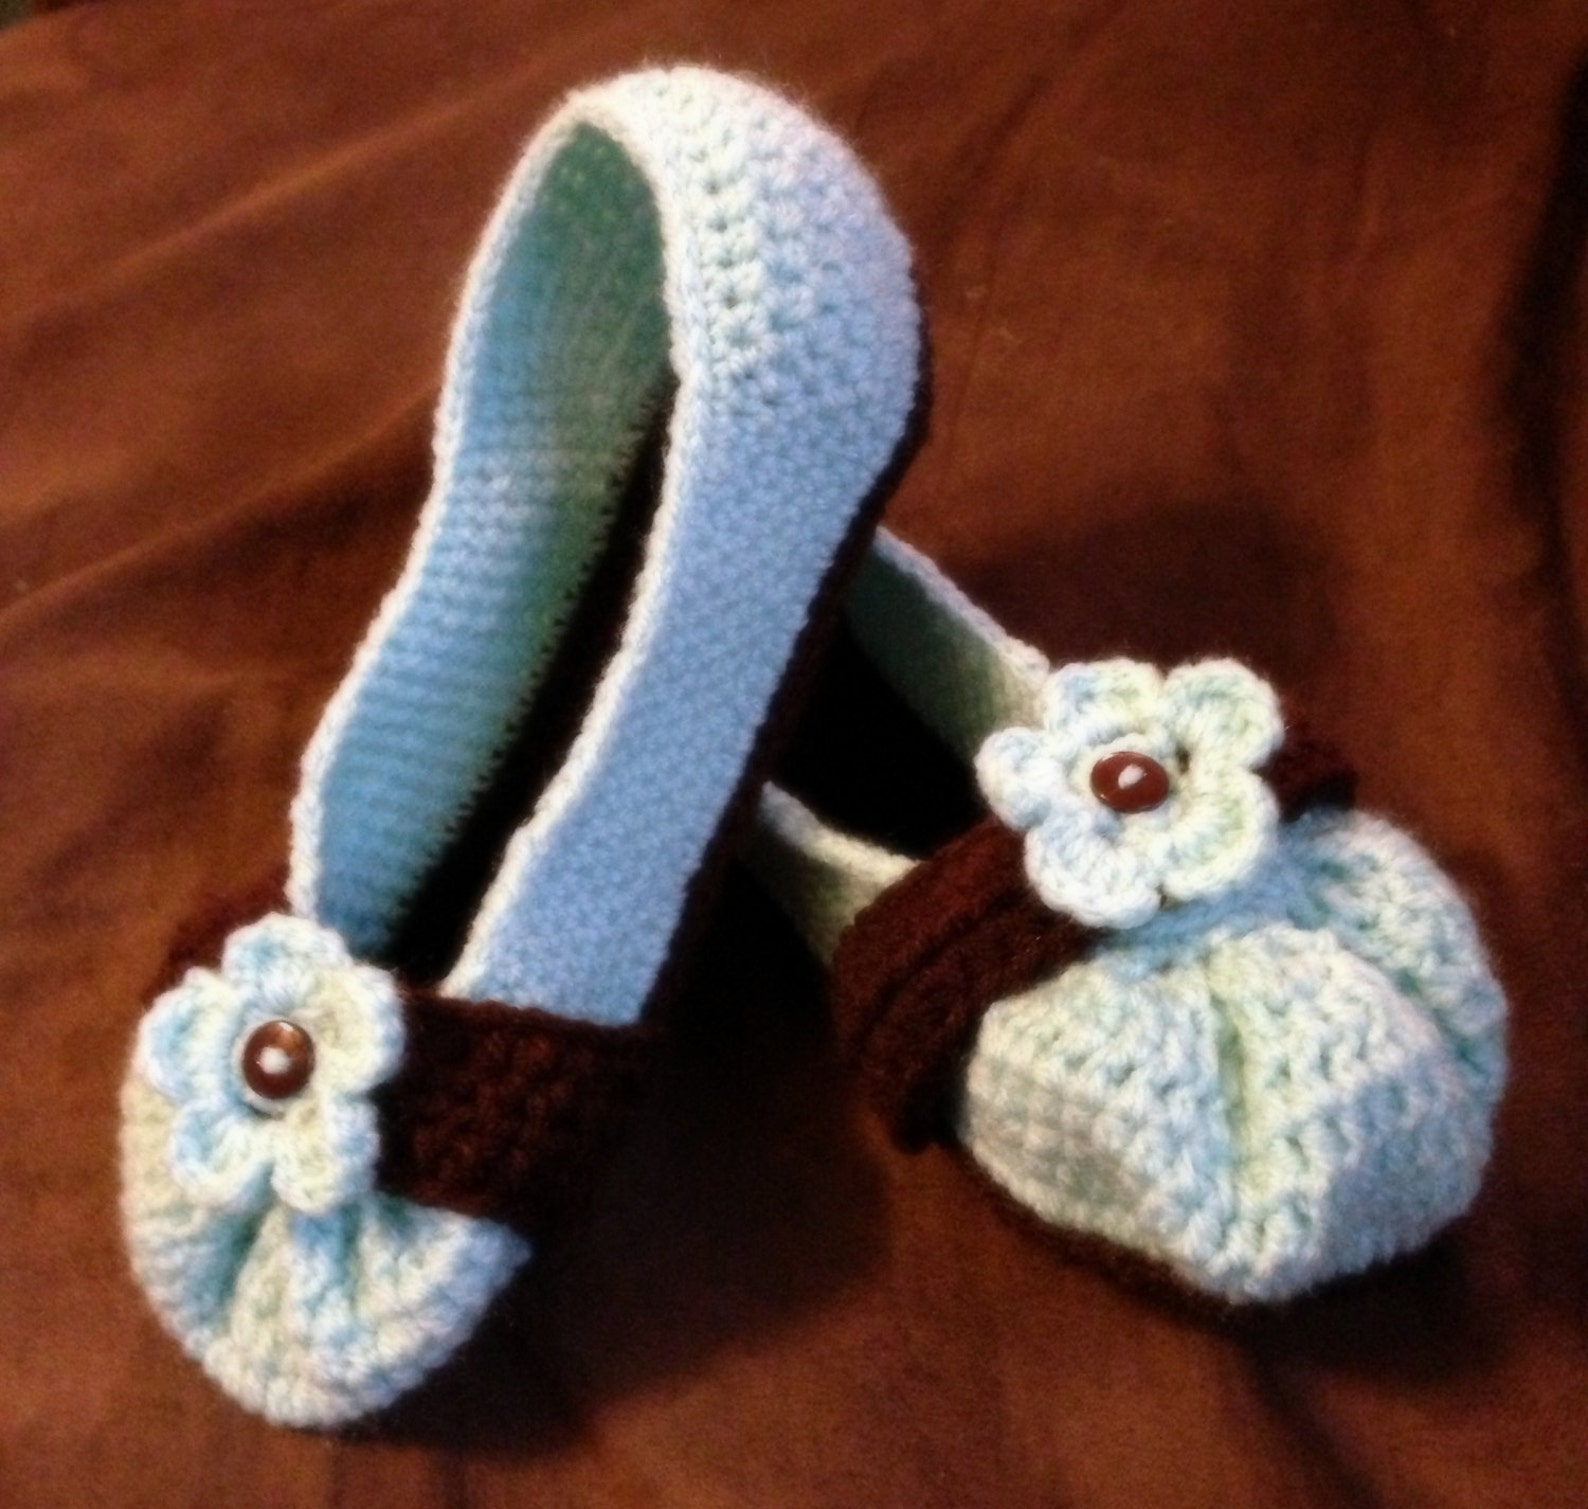 crochet adult womens cute button flower ballet flat house slippers sizes 5-10 custom made to order